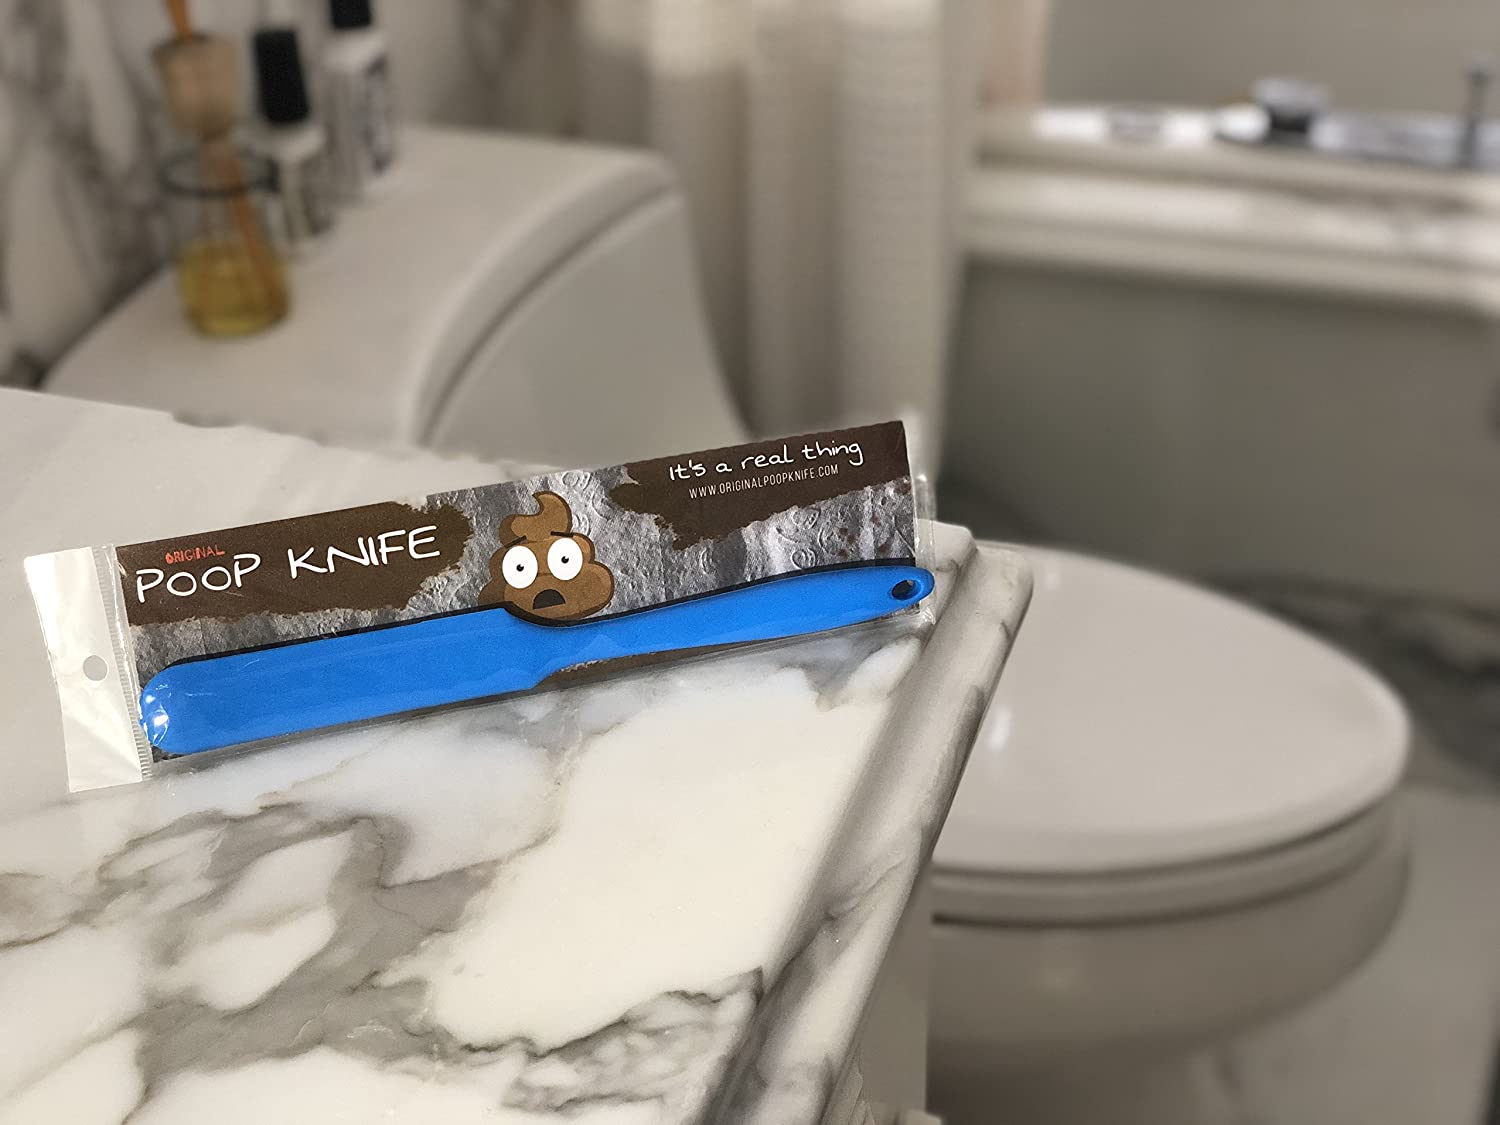 Poop Knife Helps you slice your poo to properly flush your turds - Funny gag gift